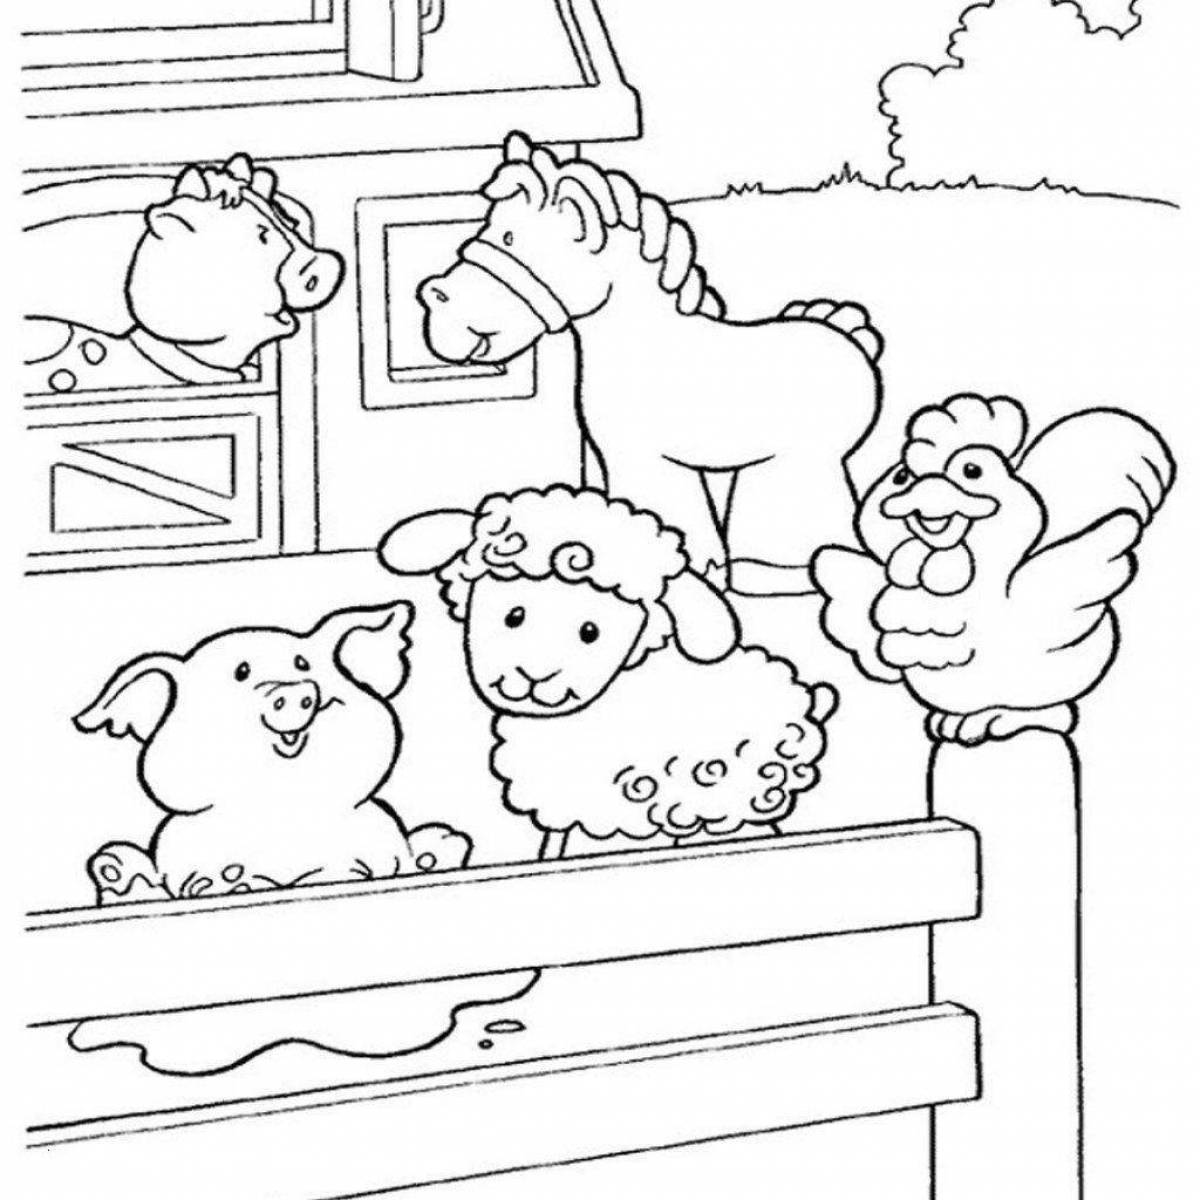 Adorable winter hut coloring page for kids